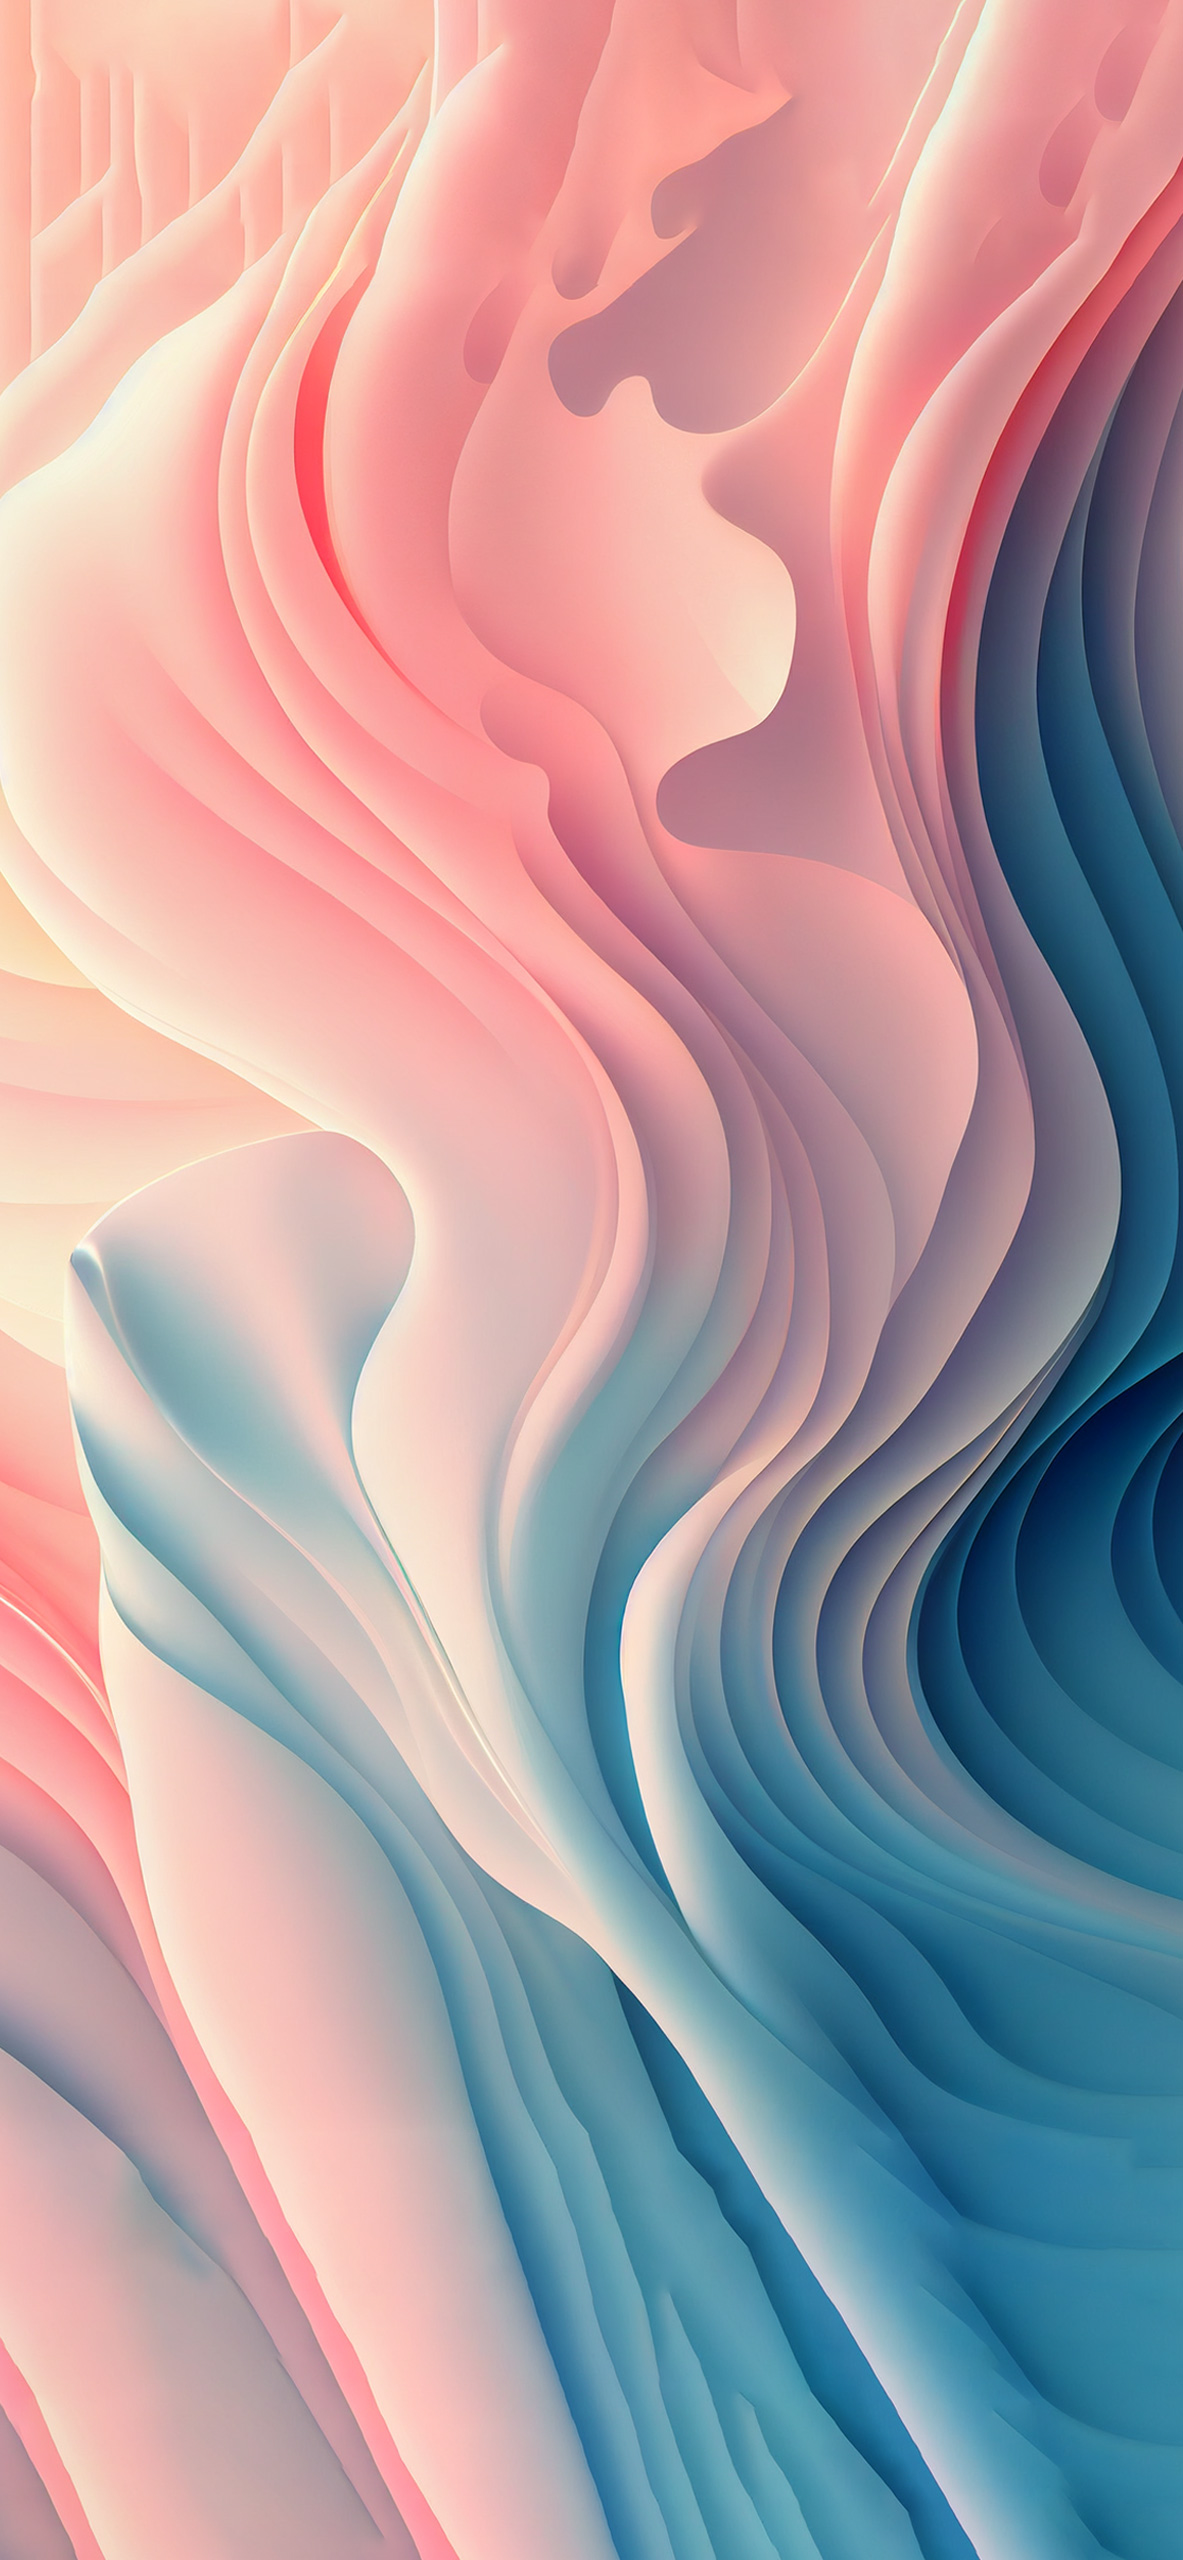 Abstract Pastel Waves Wallpaper Aesthetic Wallpaper